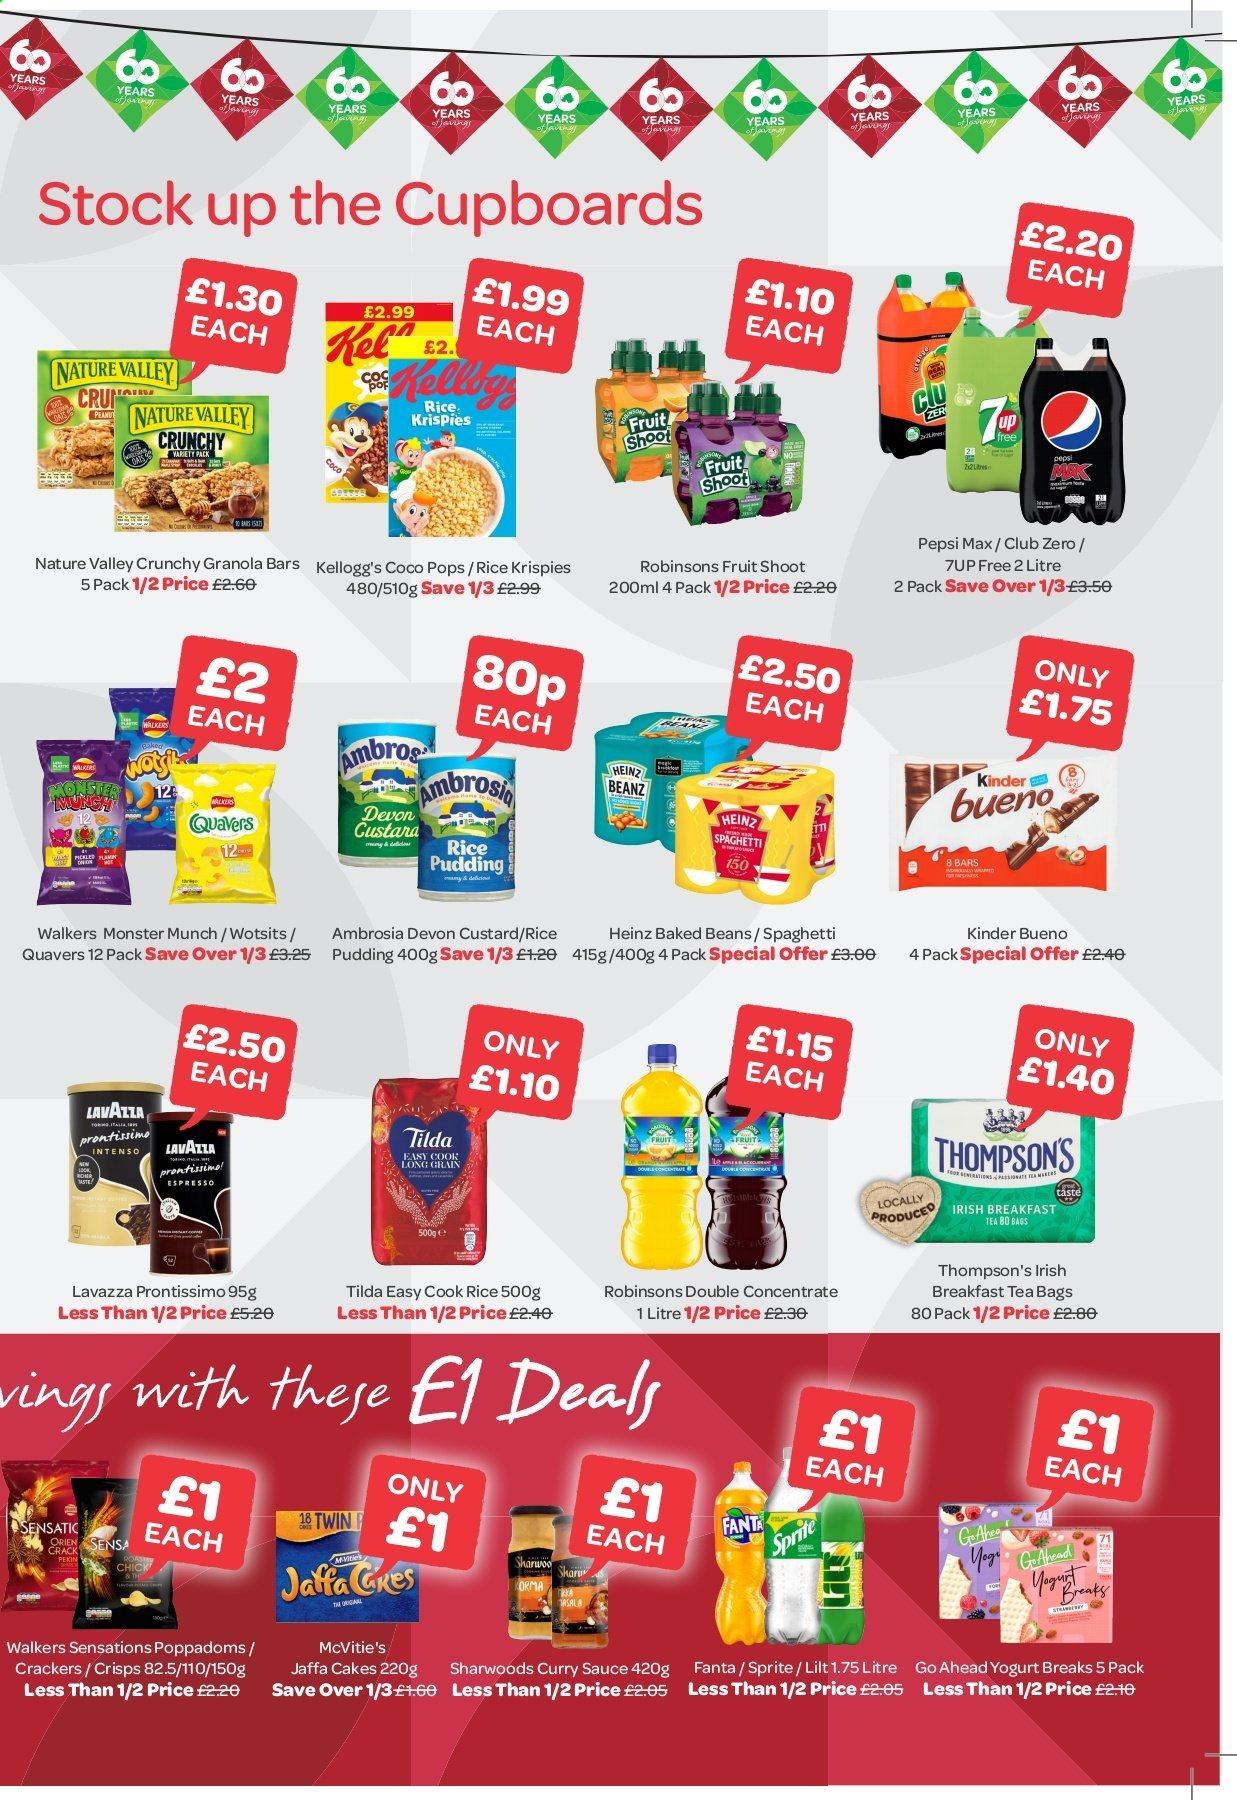 thumbnail - SPAR offer  - 29/03/2021 - 25/04/2021 - Sales products - beans, cake, spaghetti, sauce, pudding, yoghurt, Monster Munch, crackers, Kellogg's, Kinder Bueno, Heinz, baked beans, granola bar, coco pops, Rice Krispies, Nature Valley, curry sauce, Sprite, Pepsi, Fanta, Pepsi Max, Club Zero, Monster, tea bags, Intenso, Lavazza, Thompson's. Page 3.